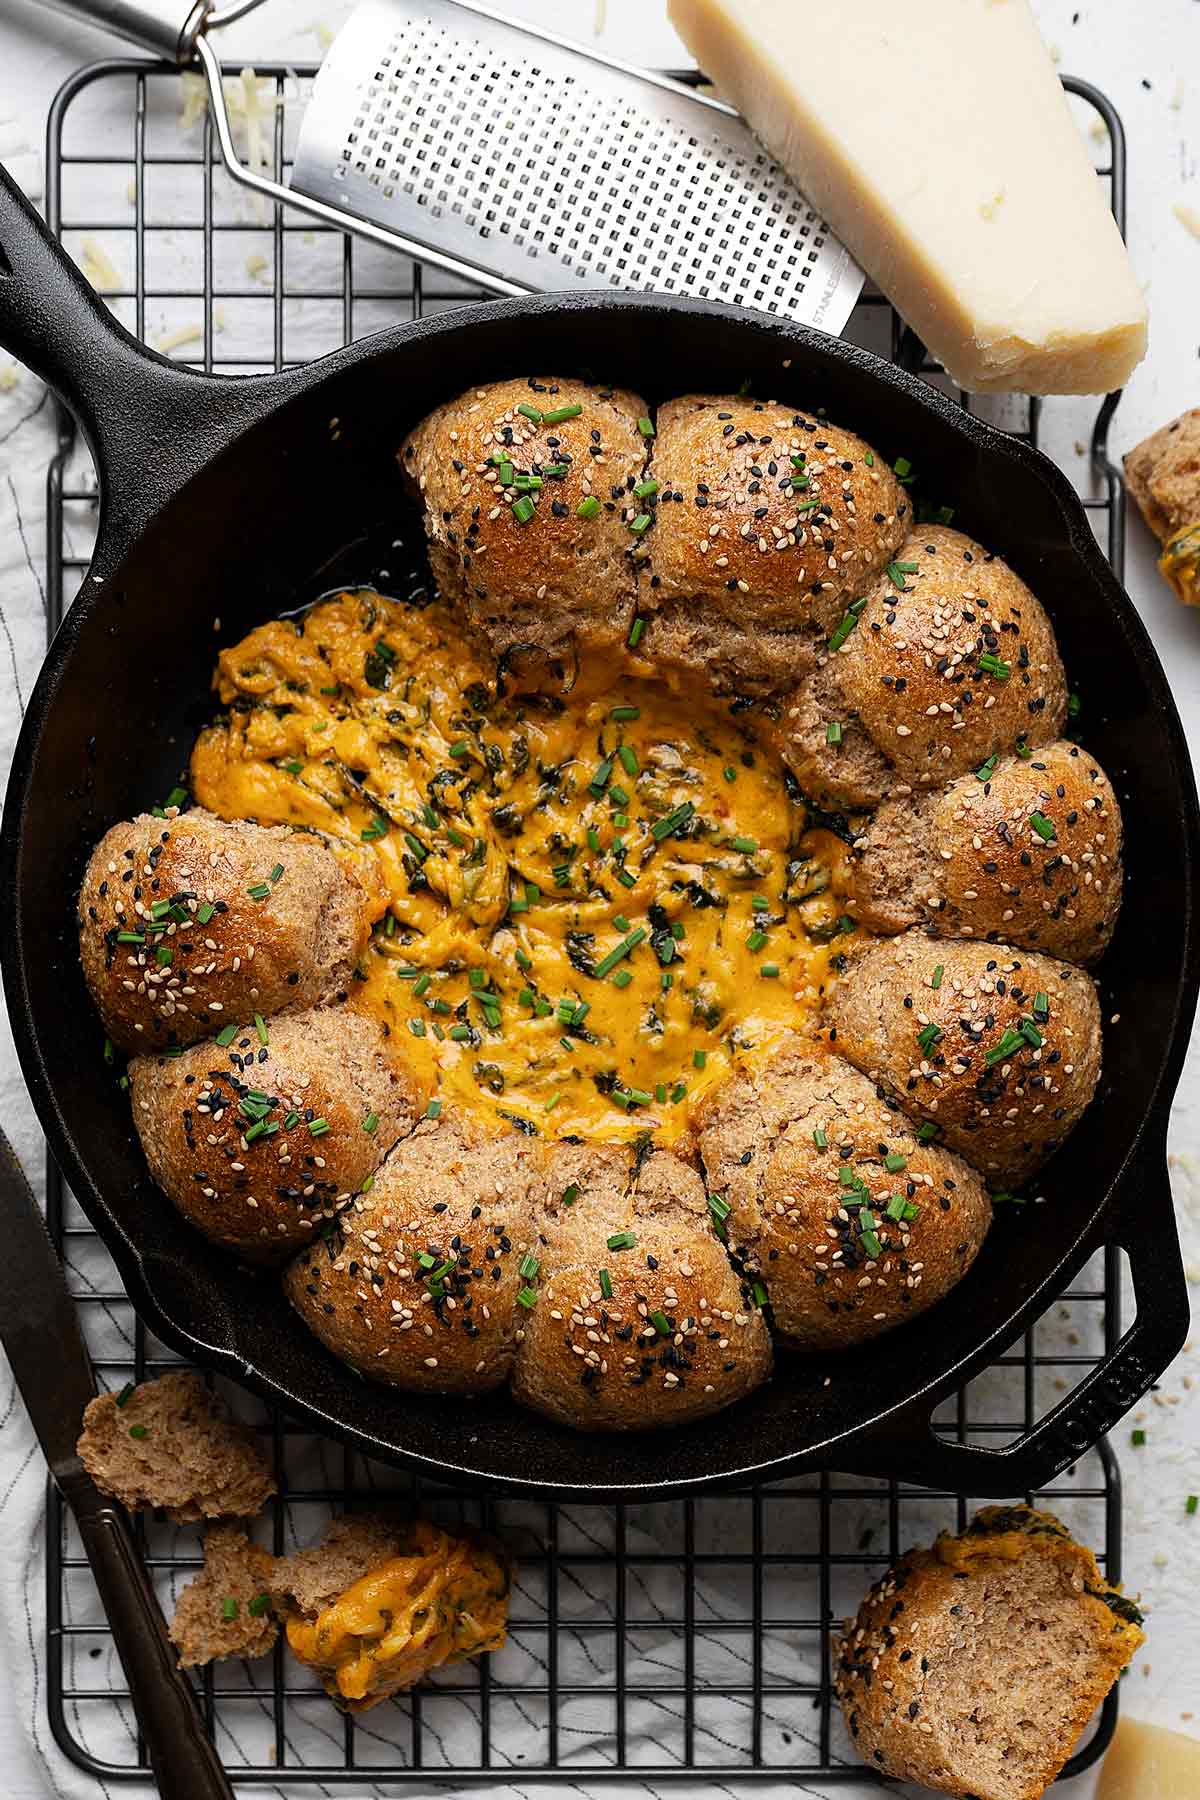 Skillet pull apart bread buns view from top